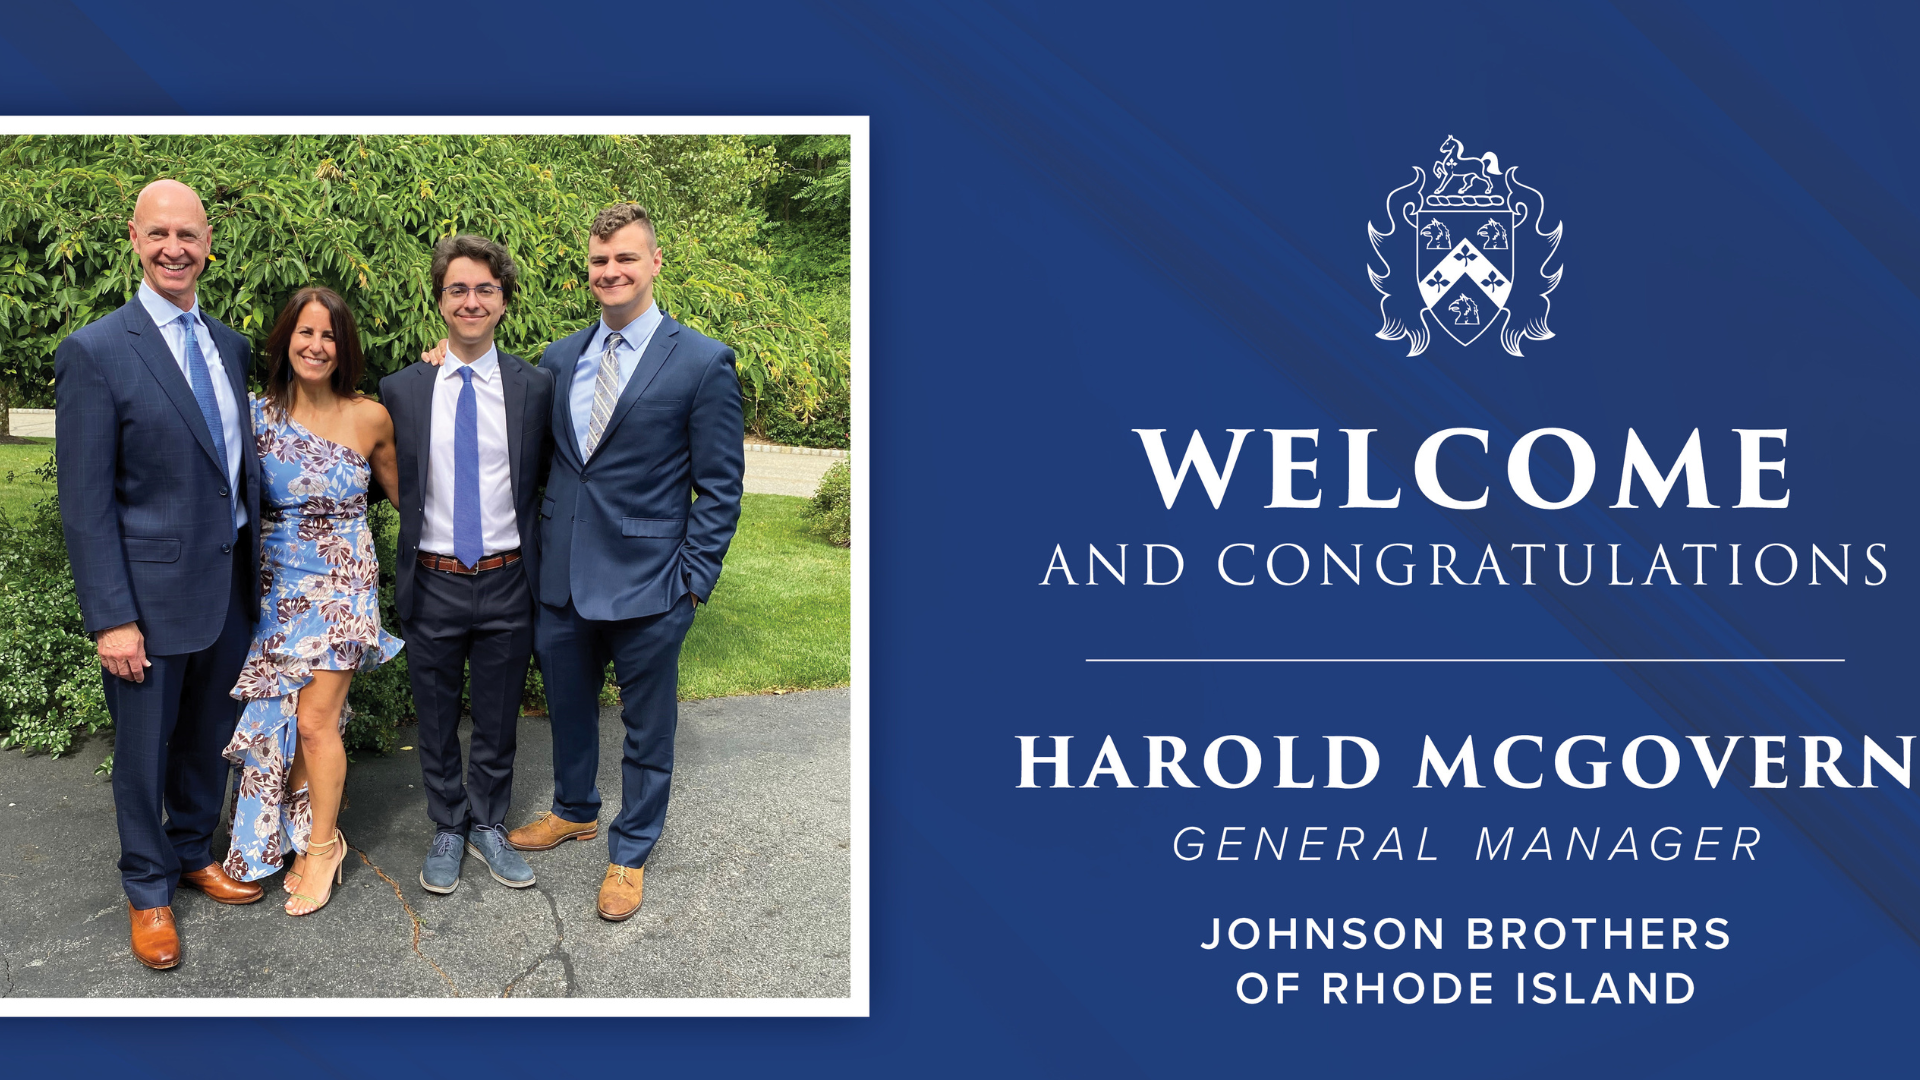 Harold McGovern Named General Manager, Johnson Brothers of Rhode Island